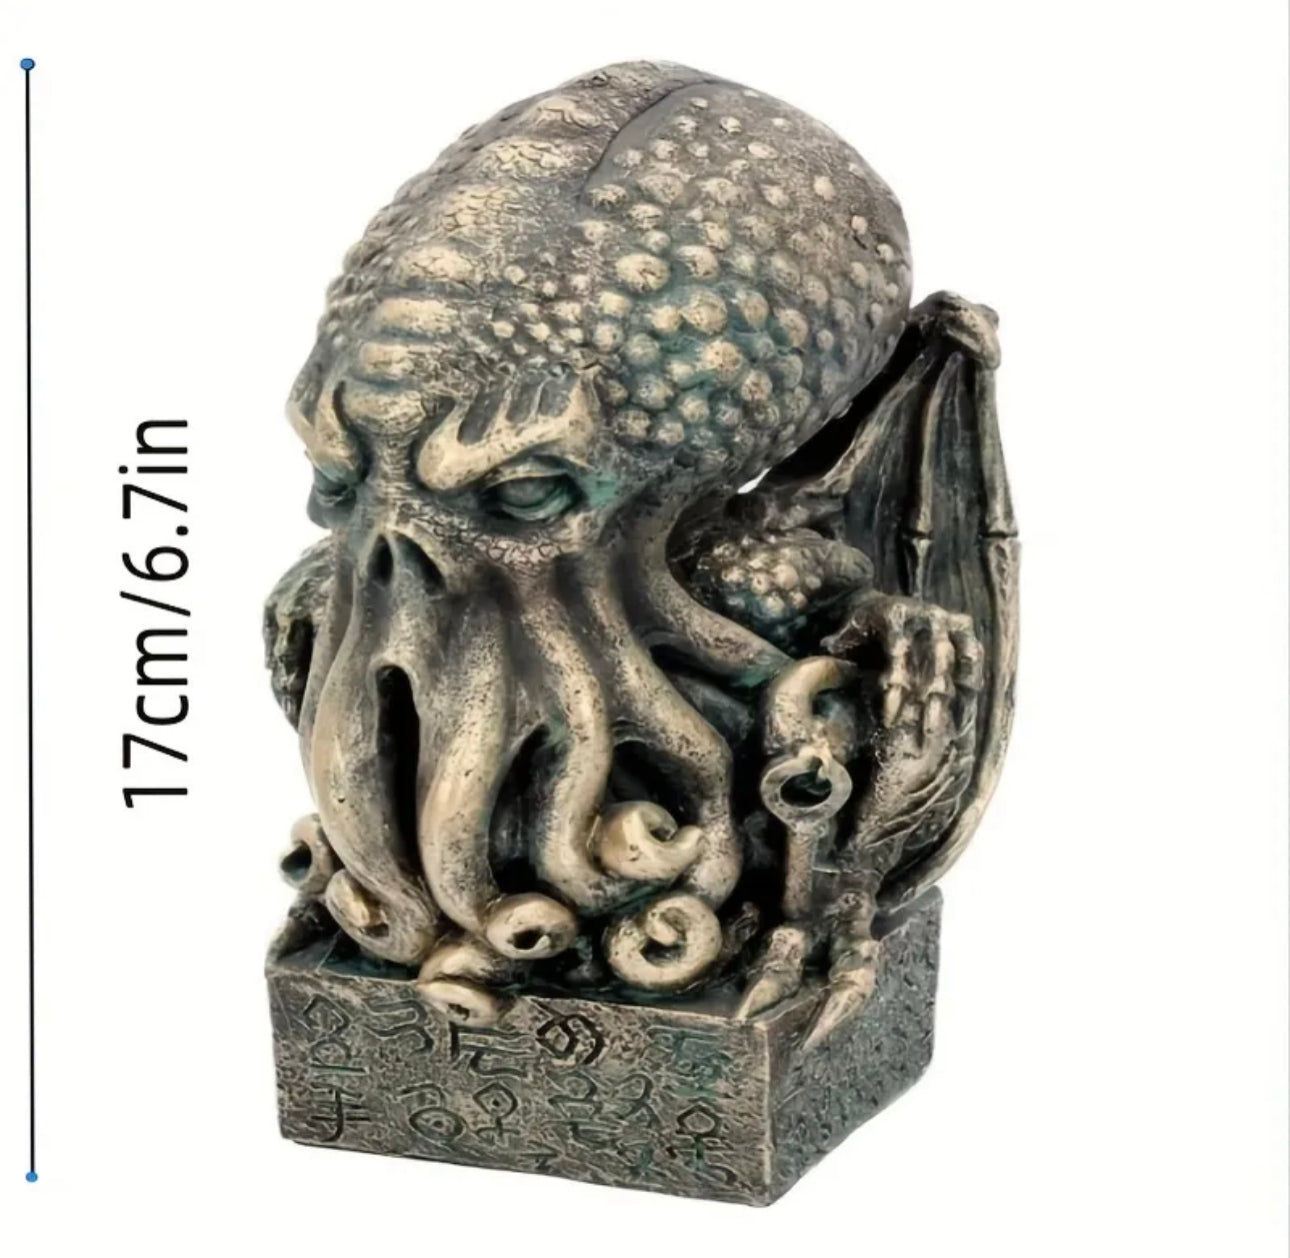 New Mythical Statue Octopus Sculpture Resin Craft